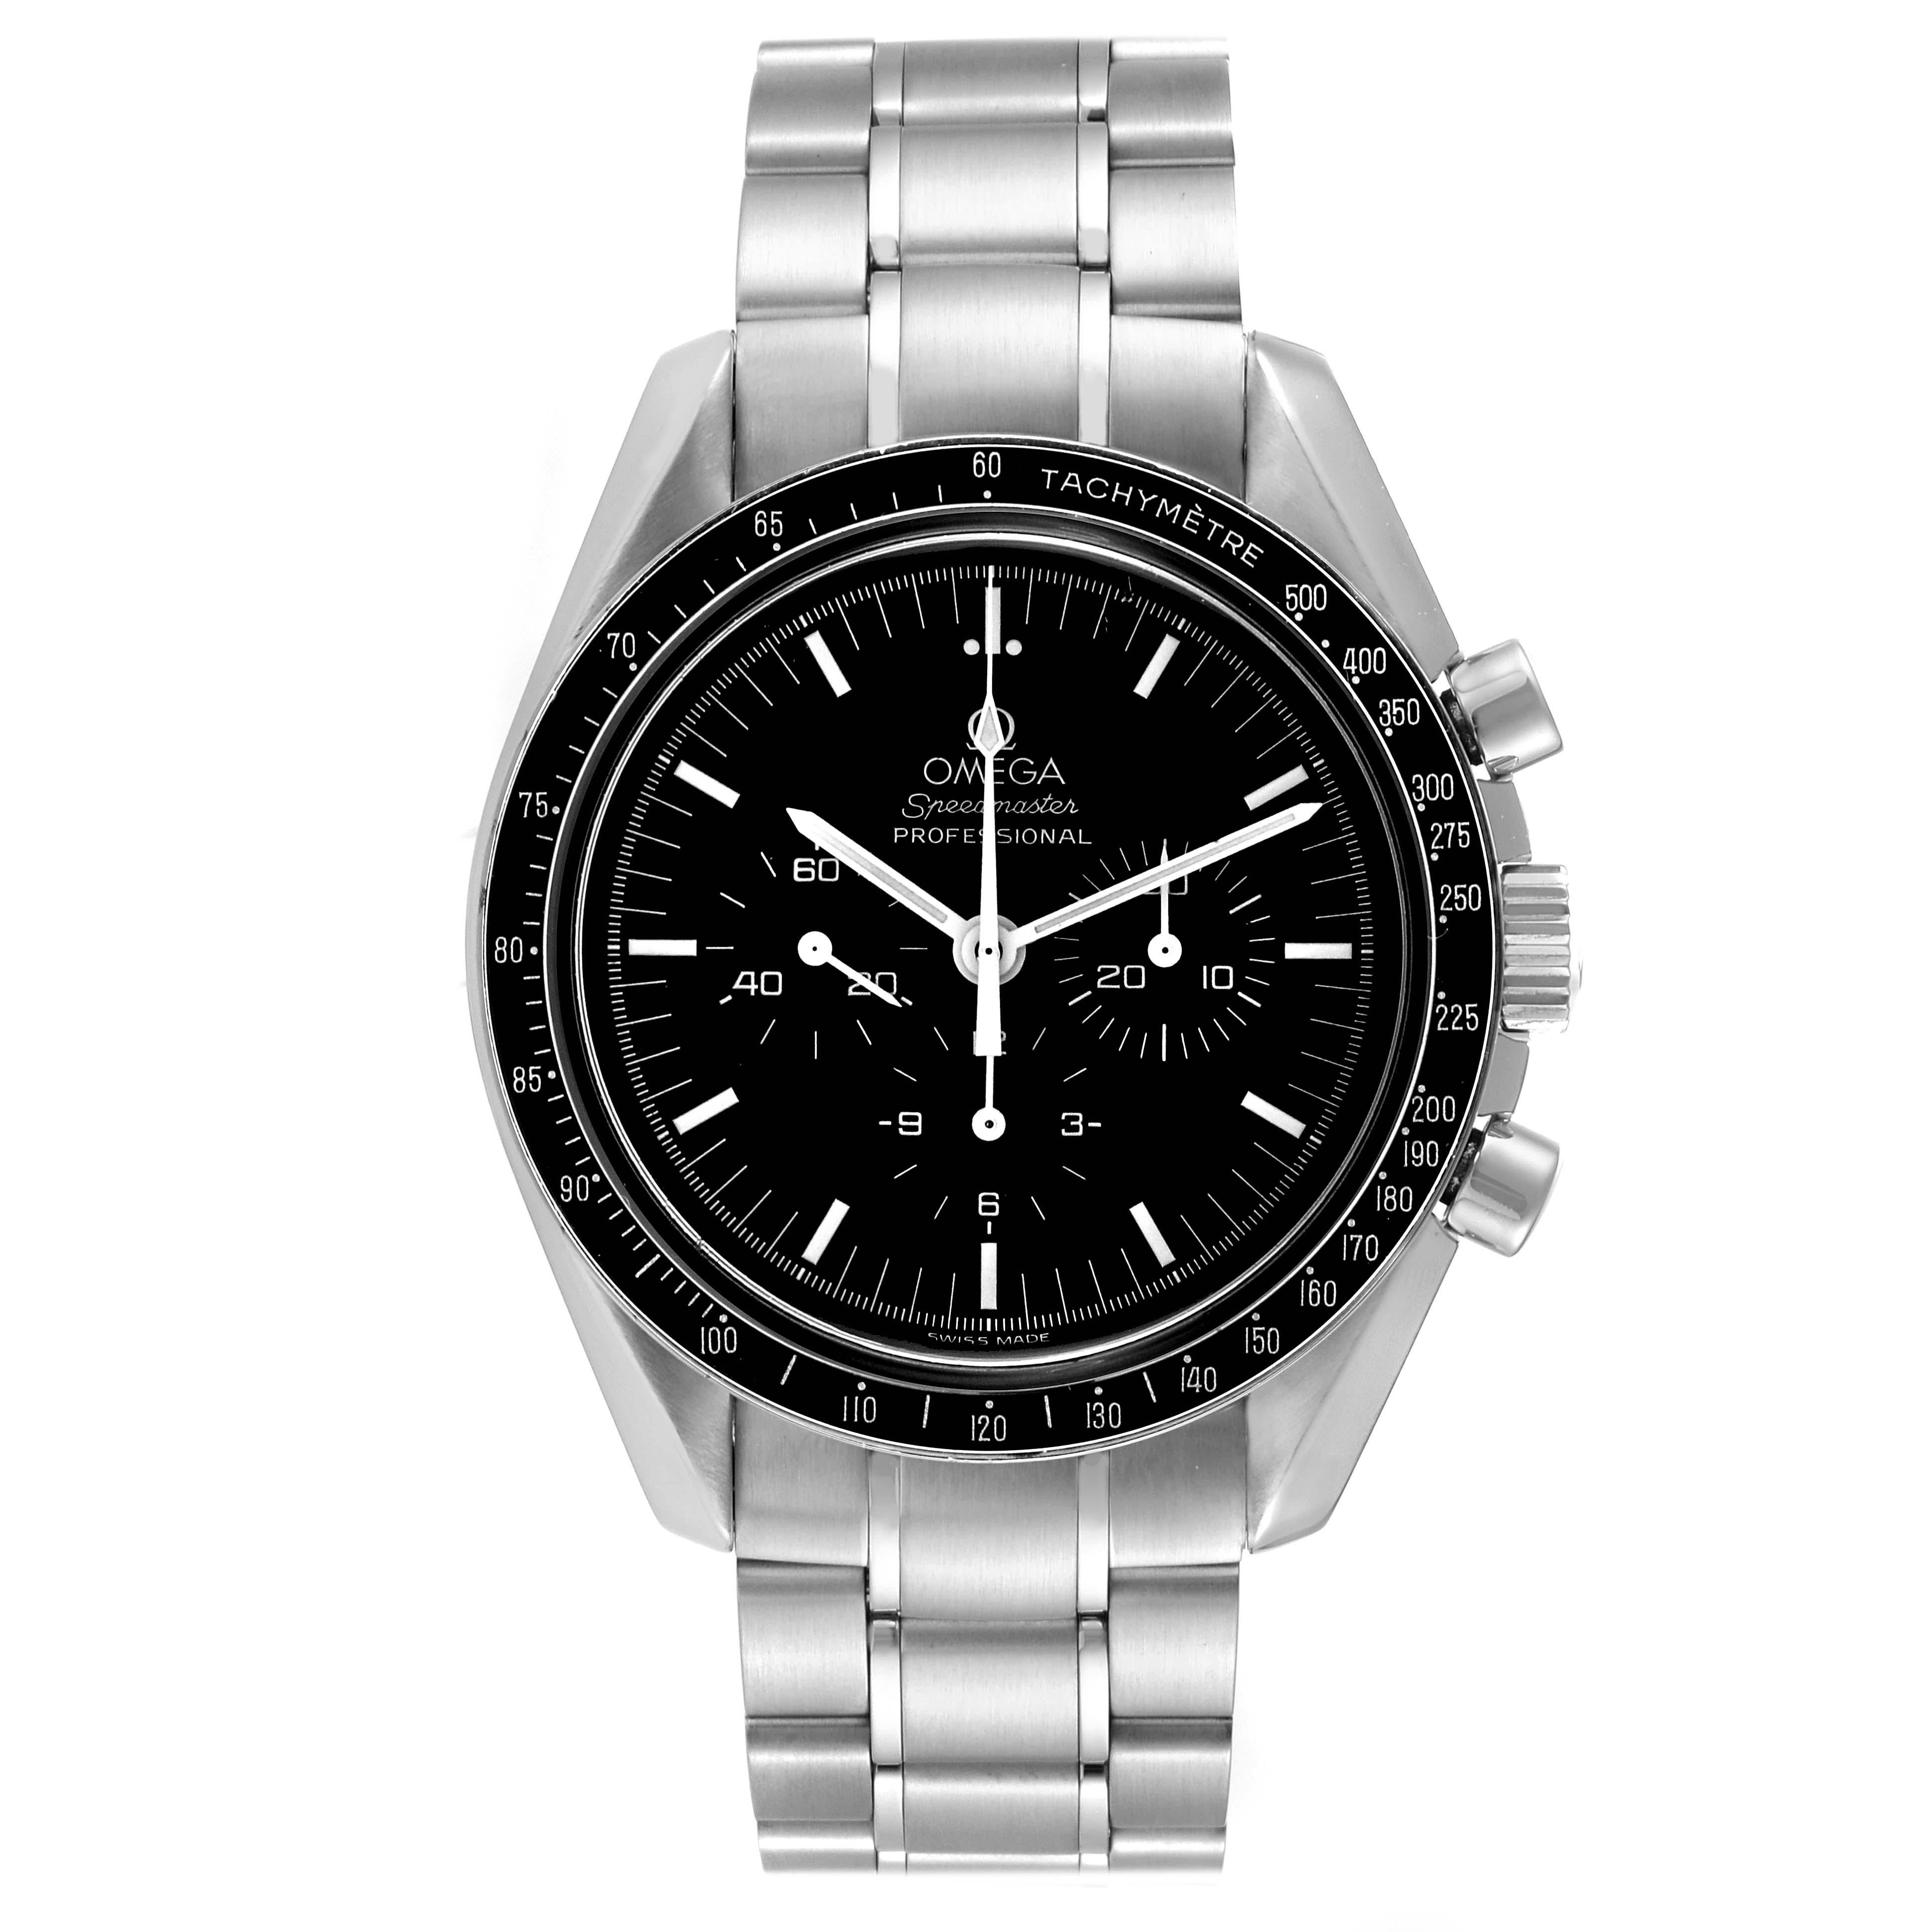 Omega Speedmaster MoonWatch Chronograph Steel Mens Watch 3570.50.00 Box Card For Sale 5